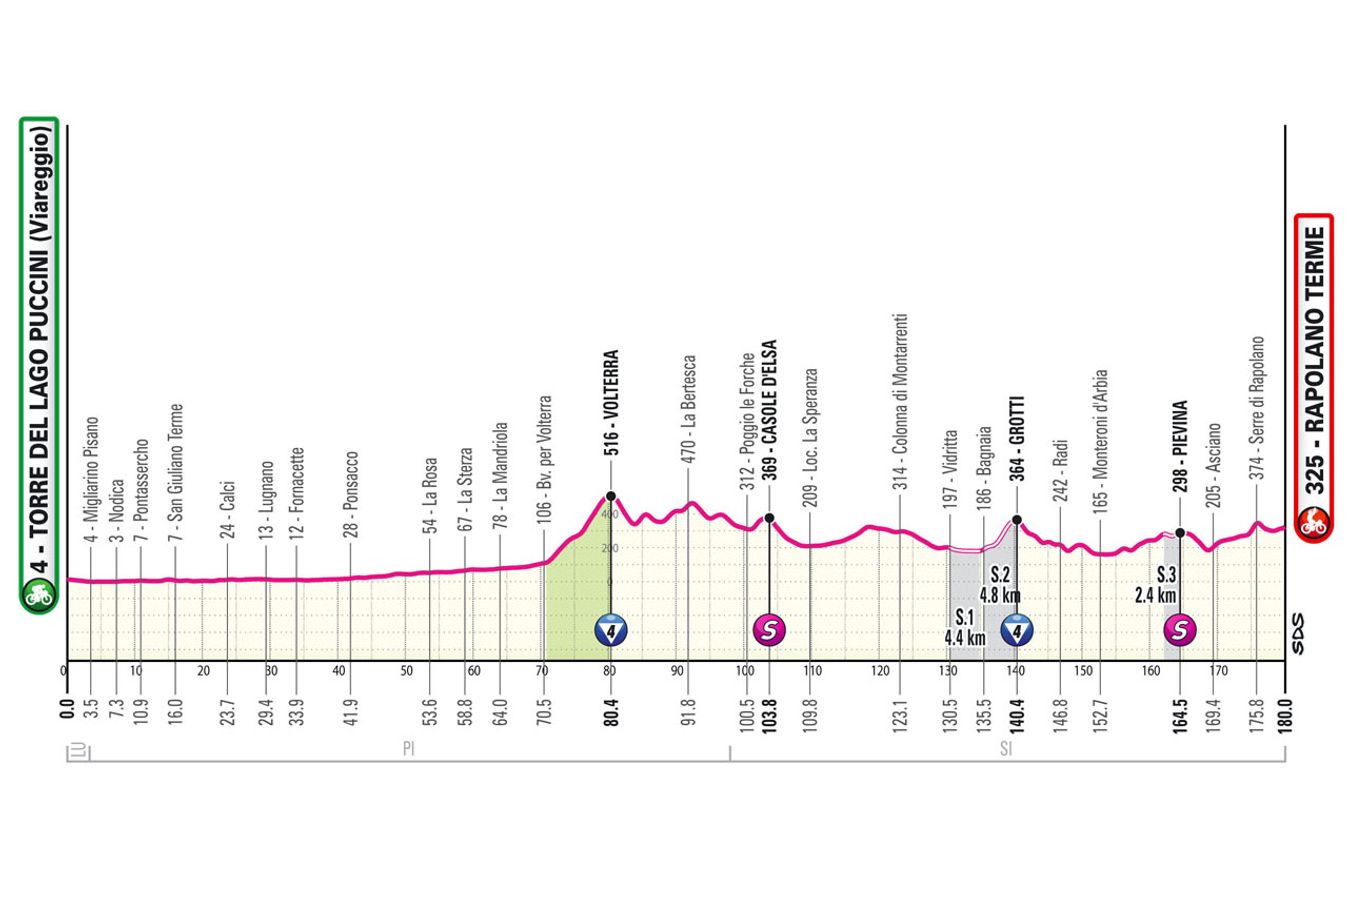 The parcours of stage 6 of the Giro d'Italia